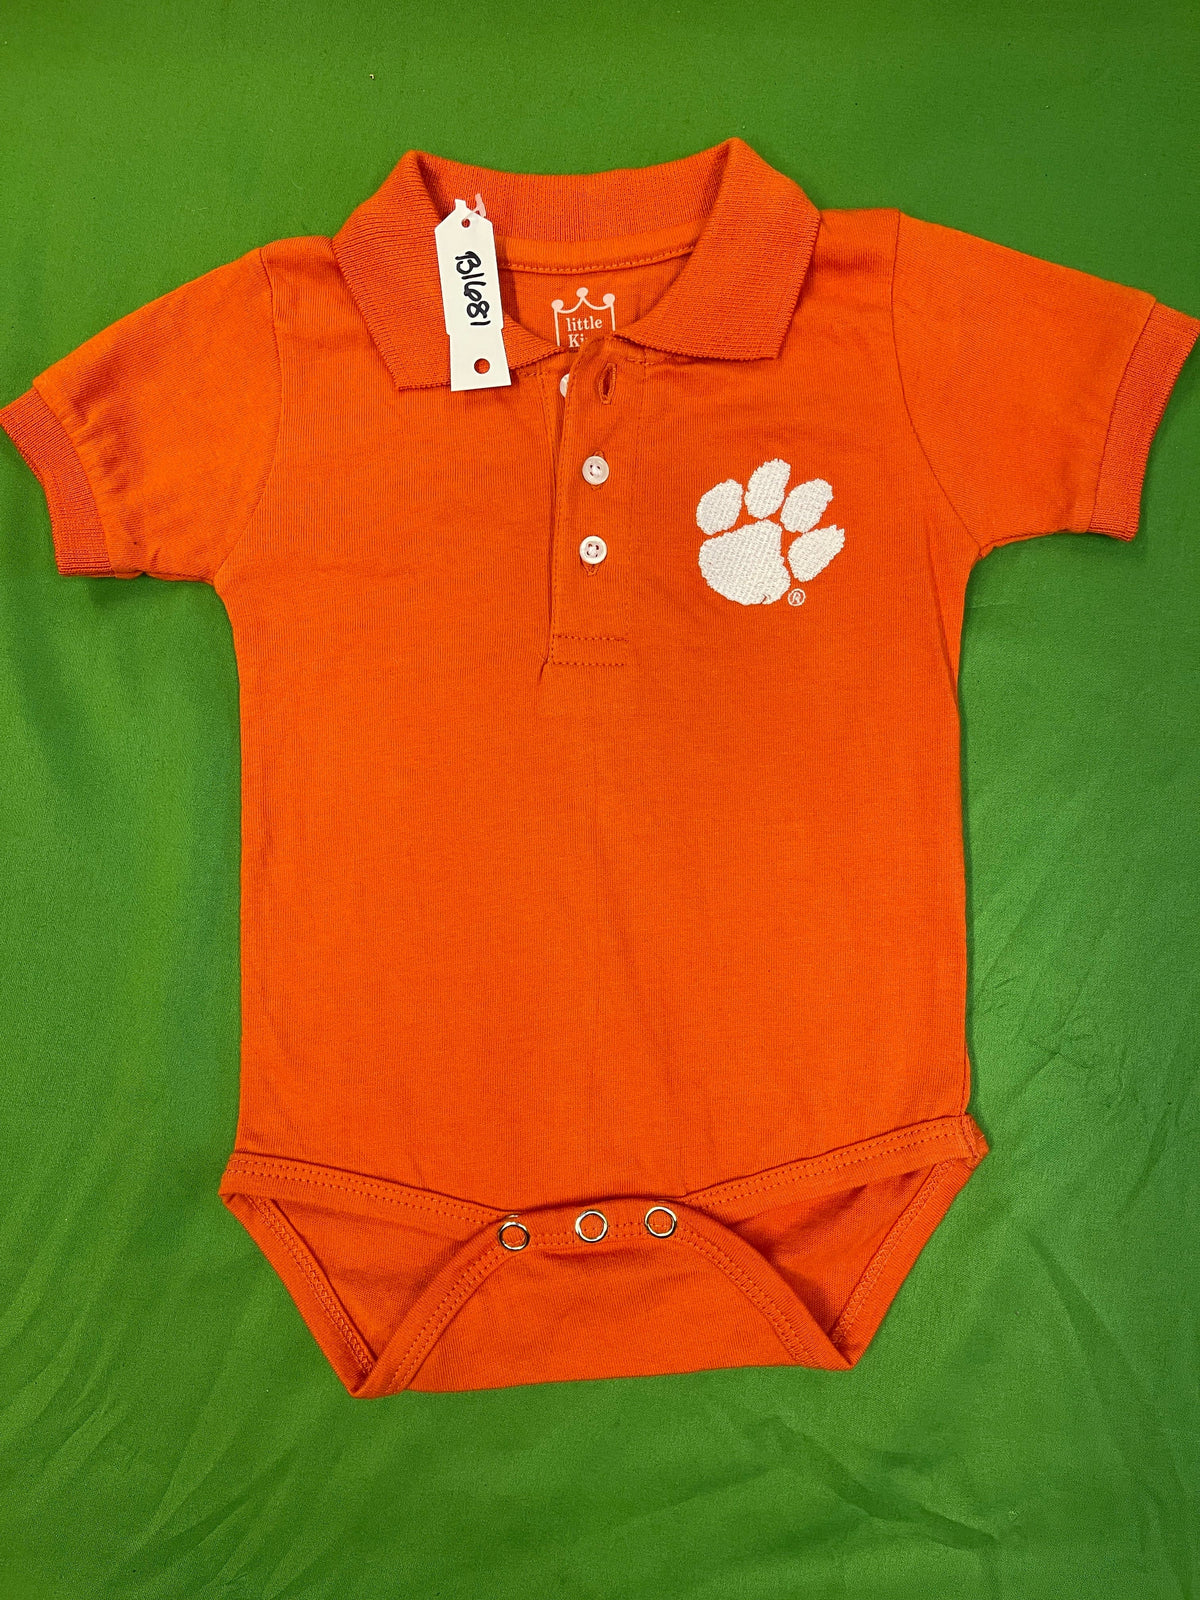 NCAA Clemson Tigers Baby Infant Polo-Style Collared Bodysuit 12 Months